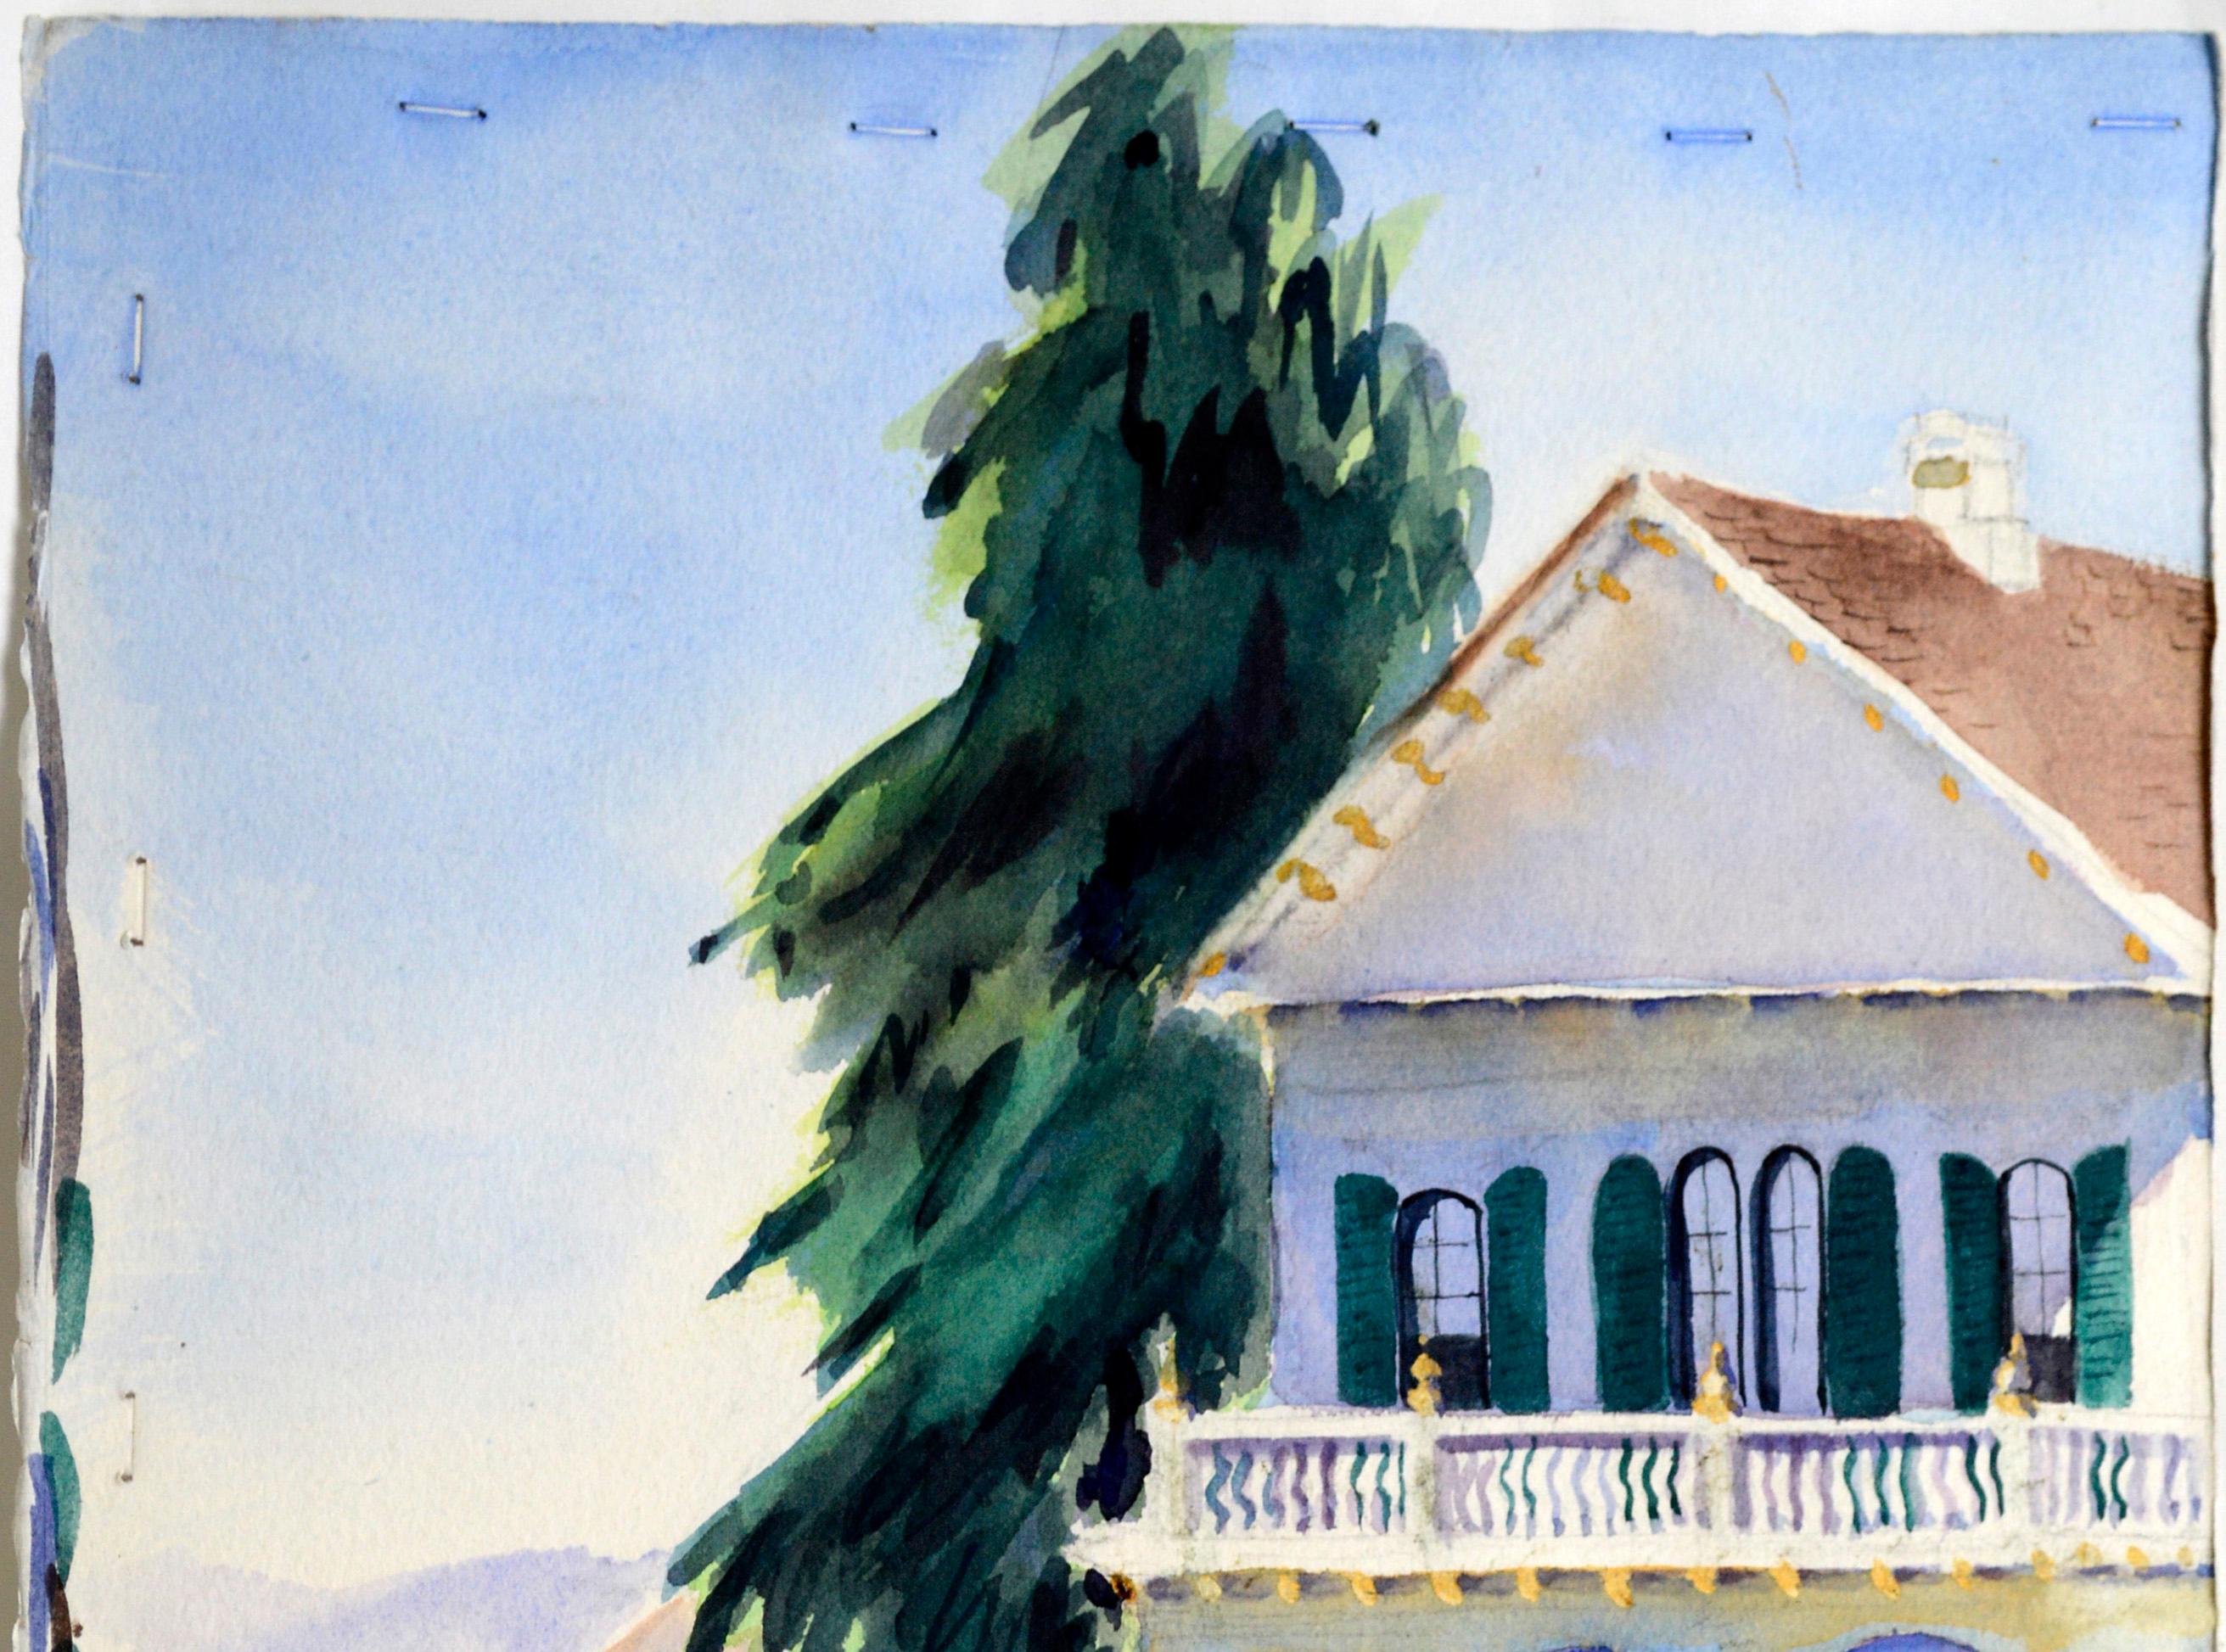 A beautiful watercolor painting of a blue house surrounded by pine trees by Lillie Esther (Hillman) Heebner, a Watsonville, Monterey Bay area, California watercolor artist. Unsigned, but acquired with a collection of her work. Please note the Needle